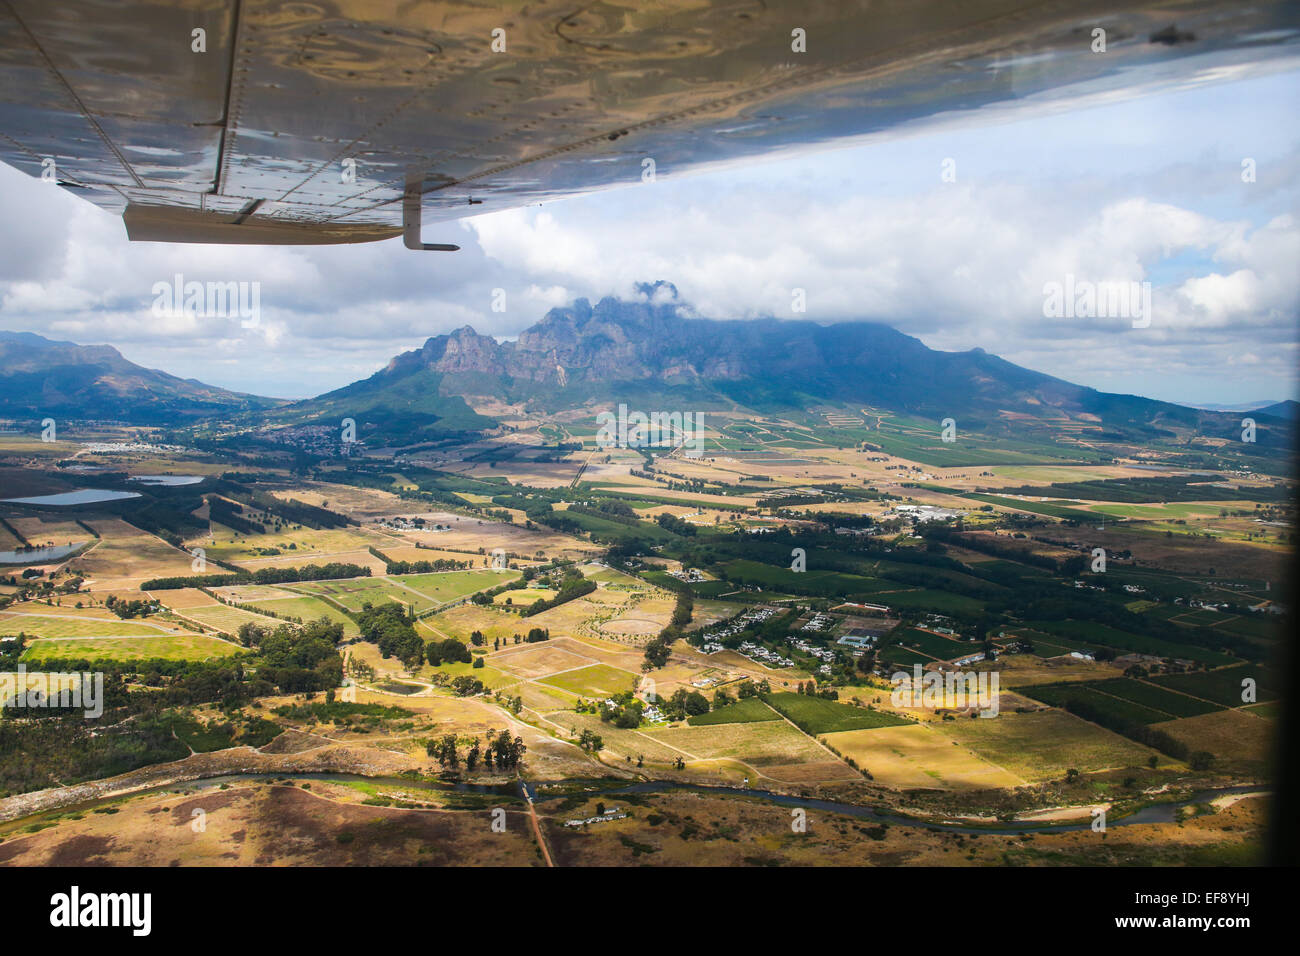 view over the stellenbosch region outside cape town, south africa Stock Photo